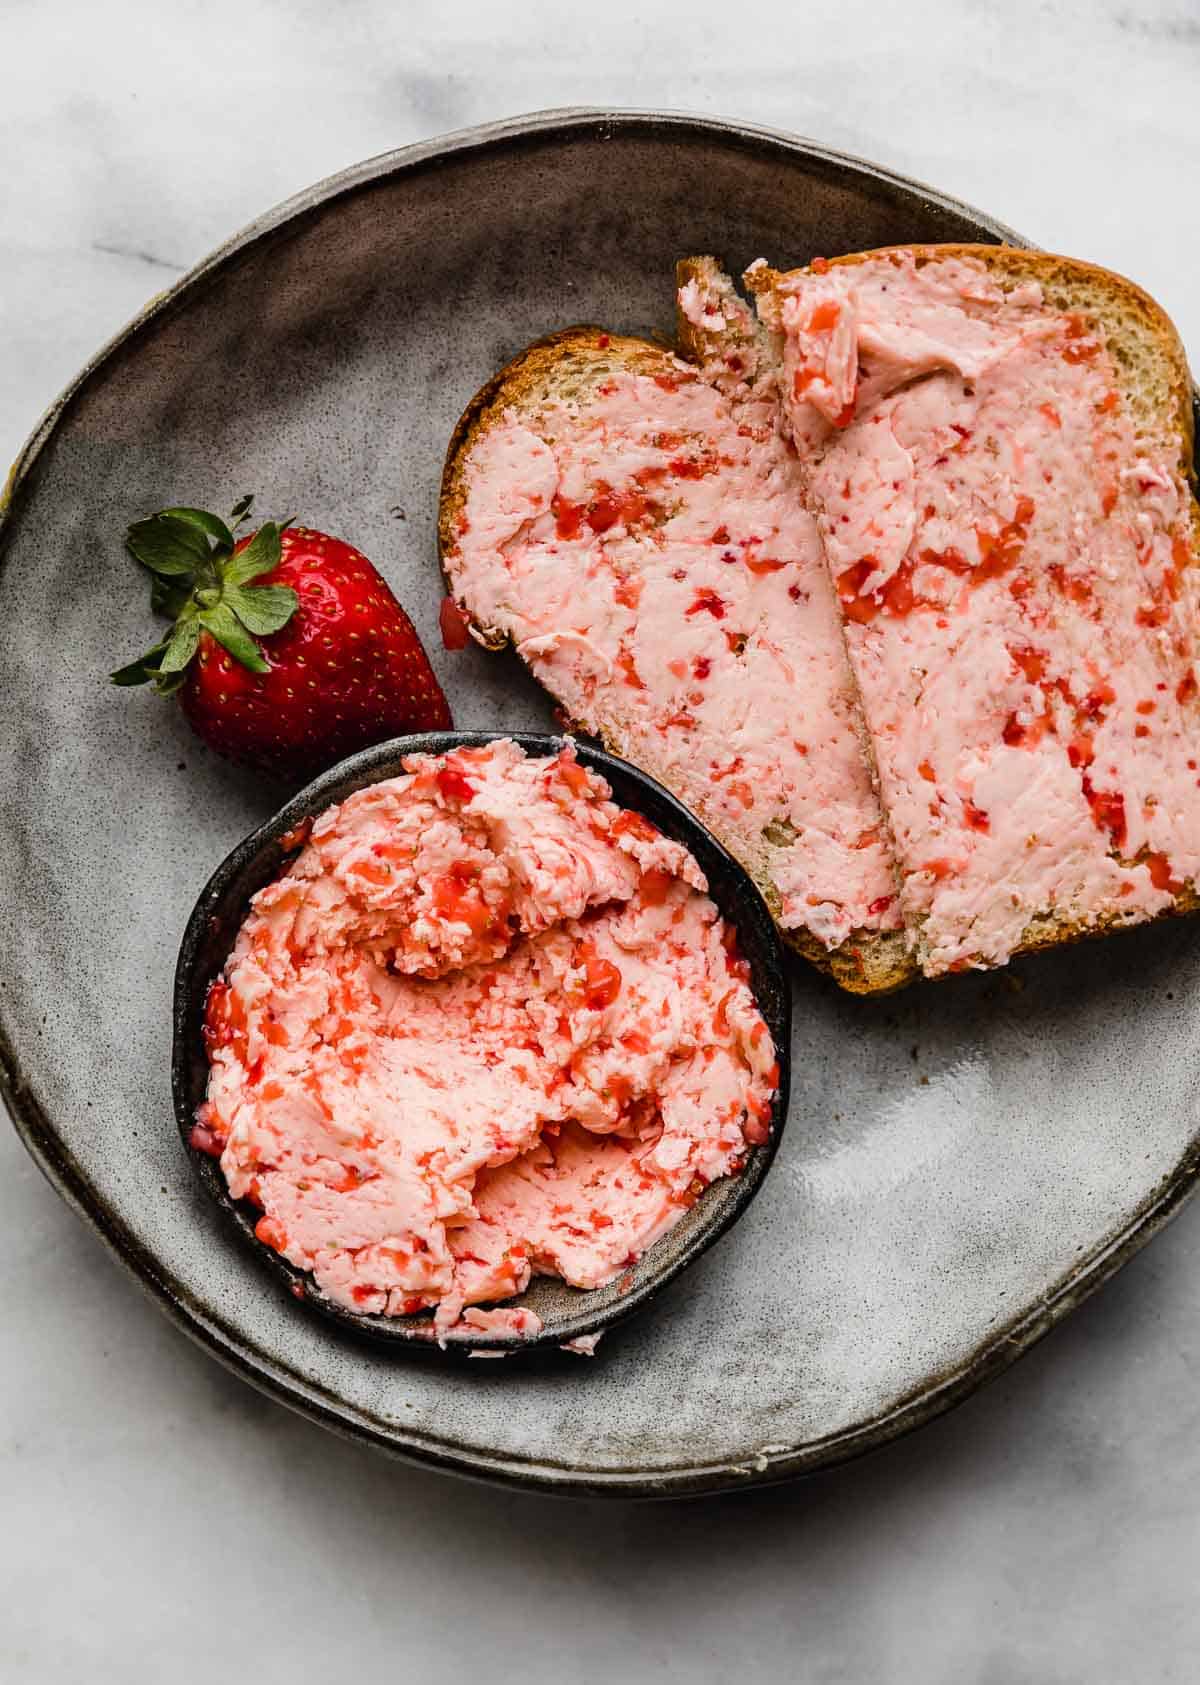 Strawberry Butter smeared on two slices of bread on a gray plate.